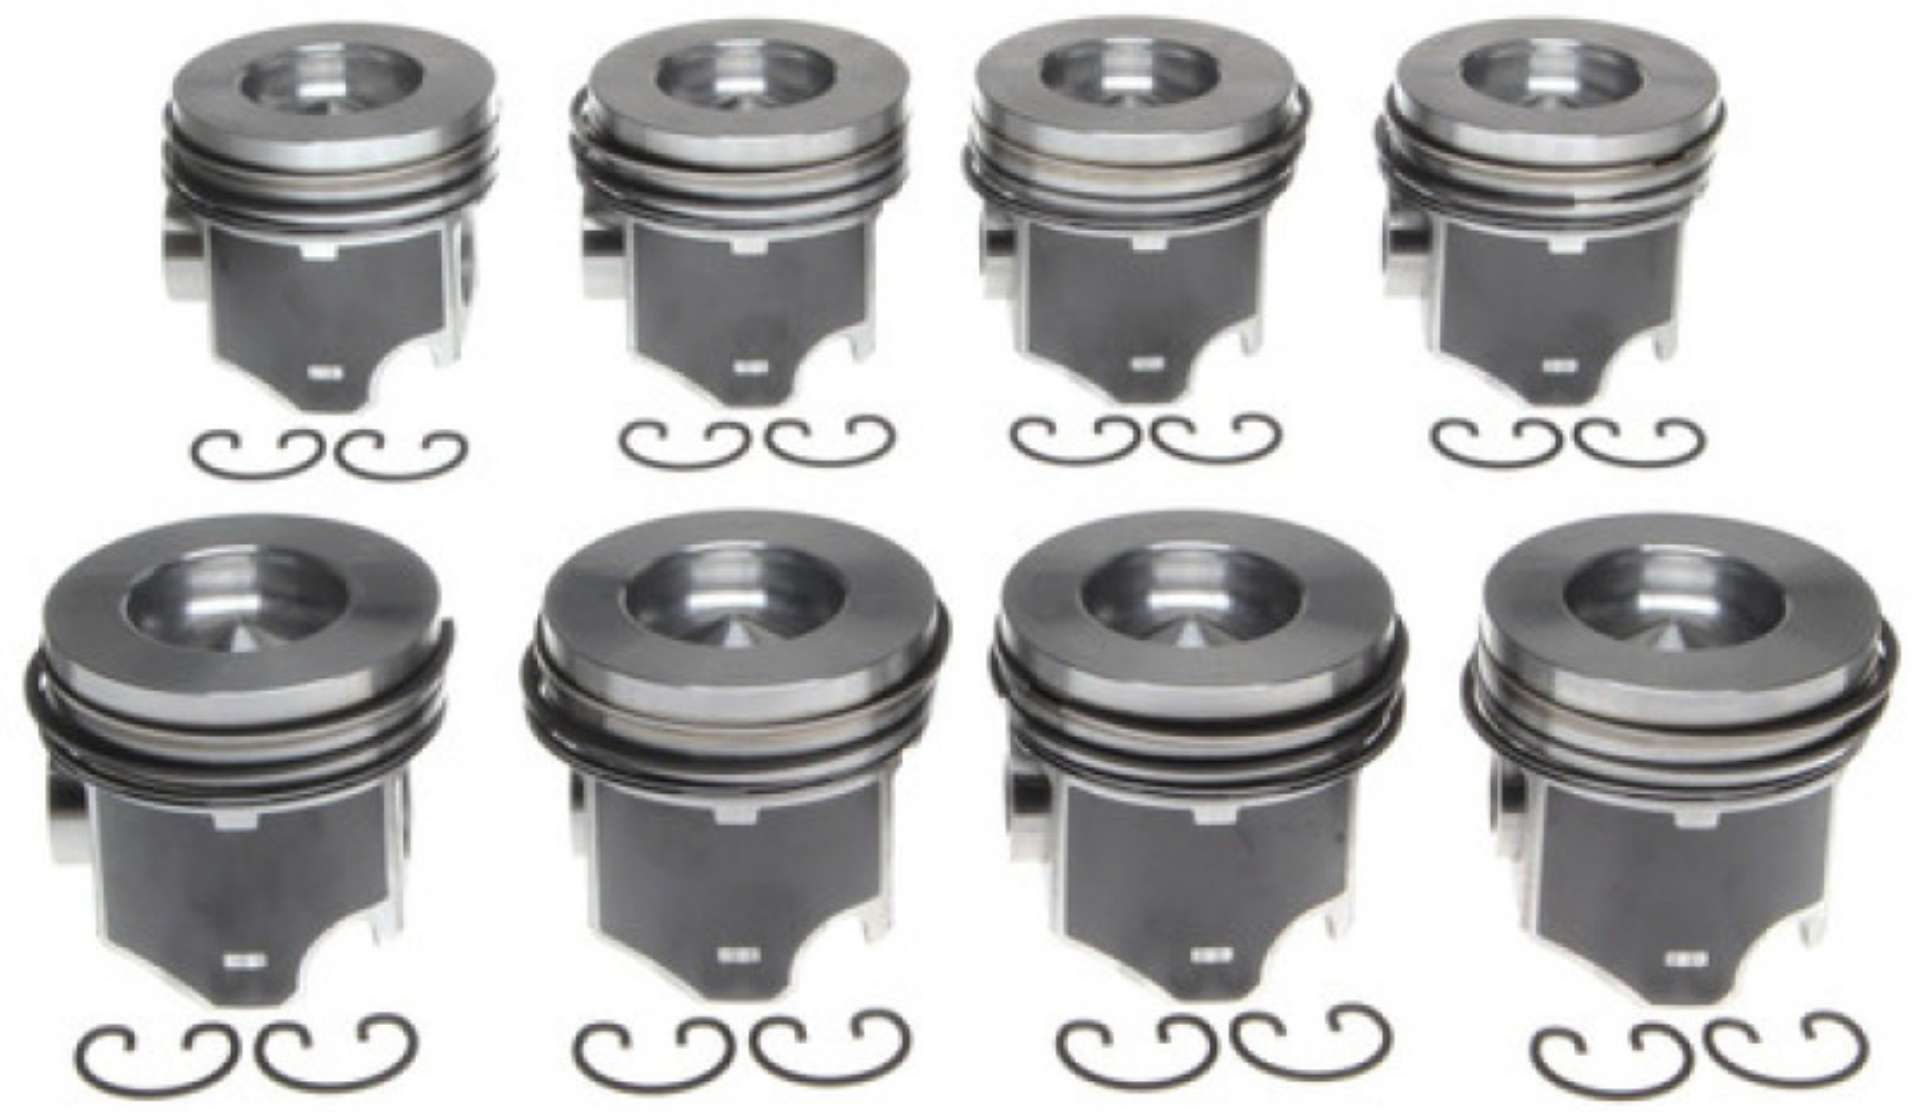 Picture of Mahle OE AMC Jeep 150 2-46L Eng 1983-93 242 4-0L Eng 1983-98 -060 Piston Set Set of 4